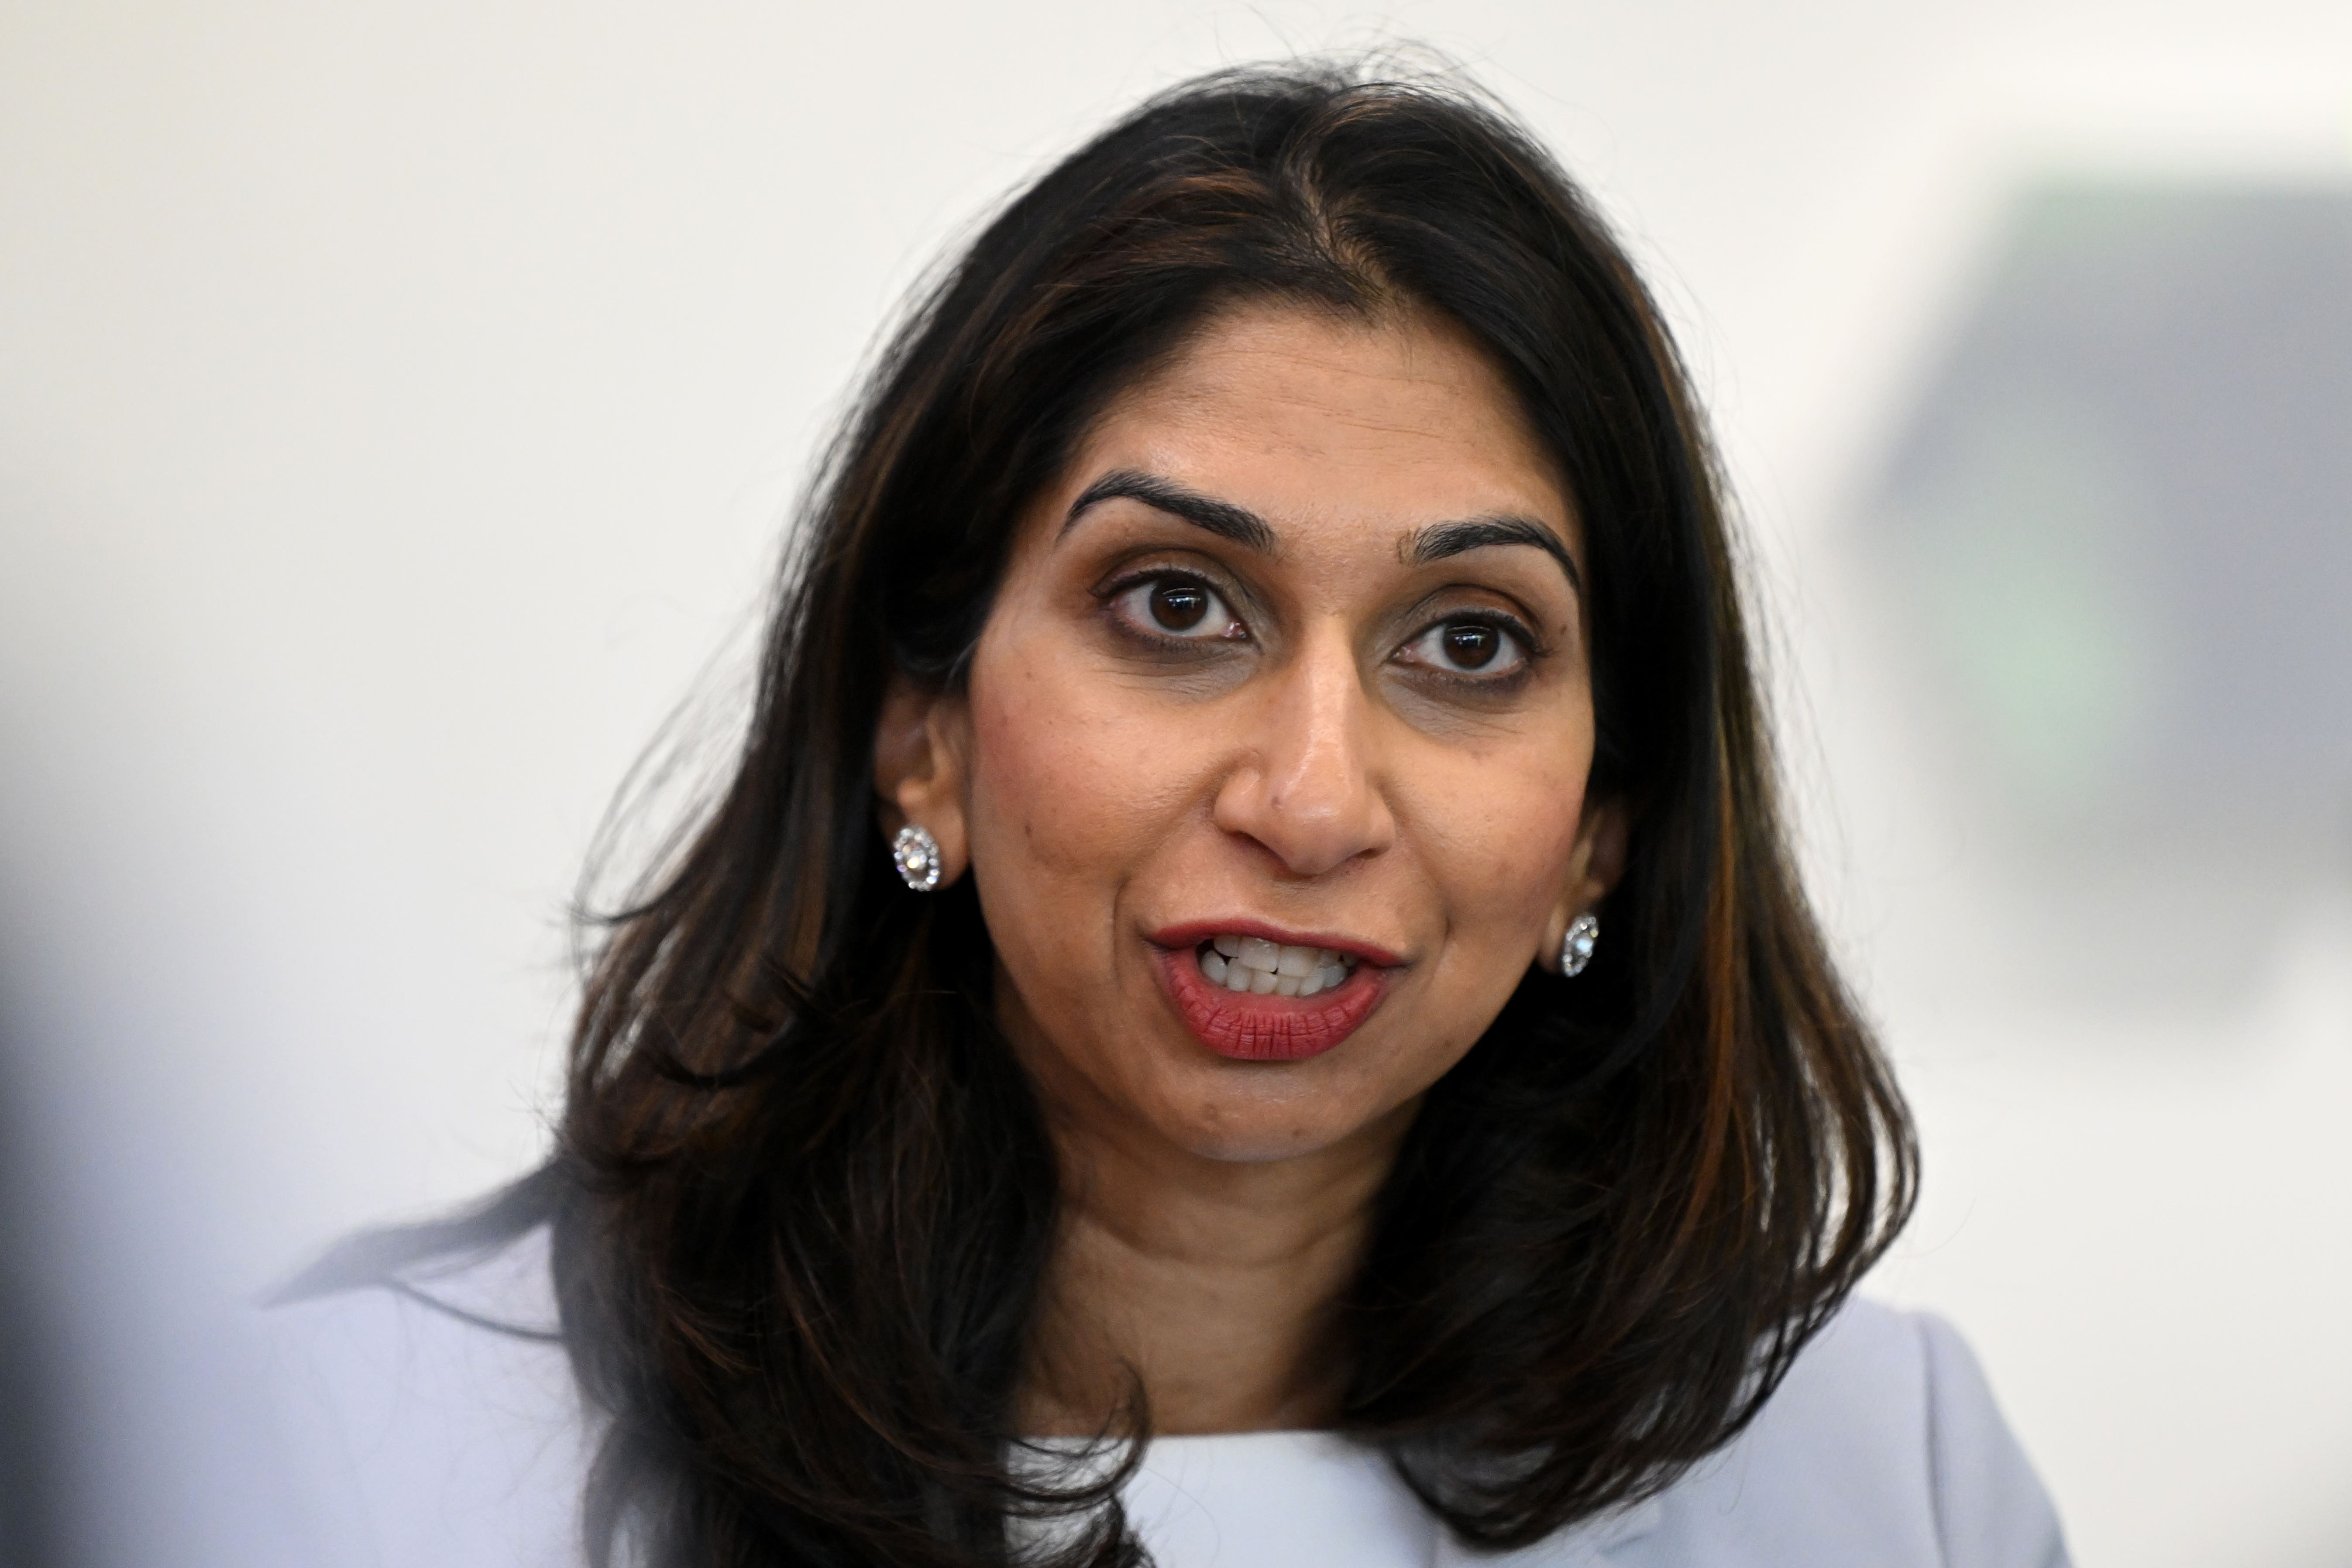 Suella Braverman MP has been sacked from the same job twice